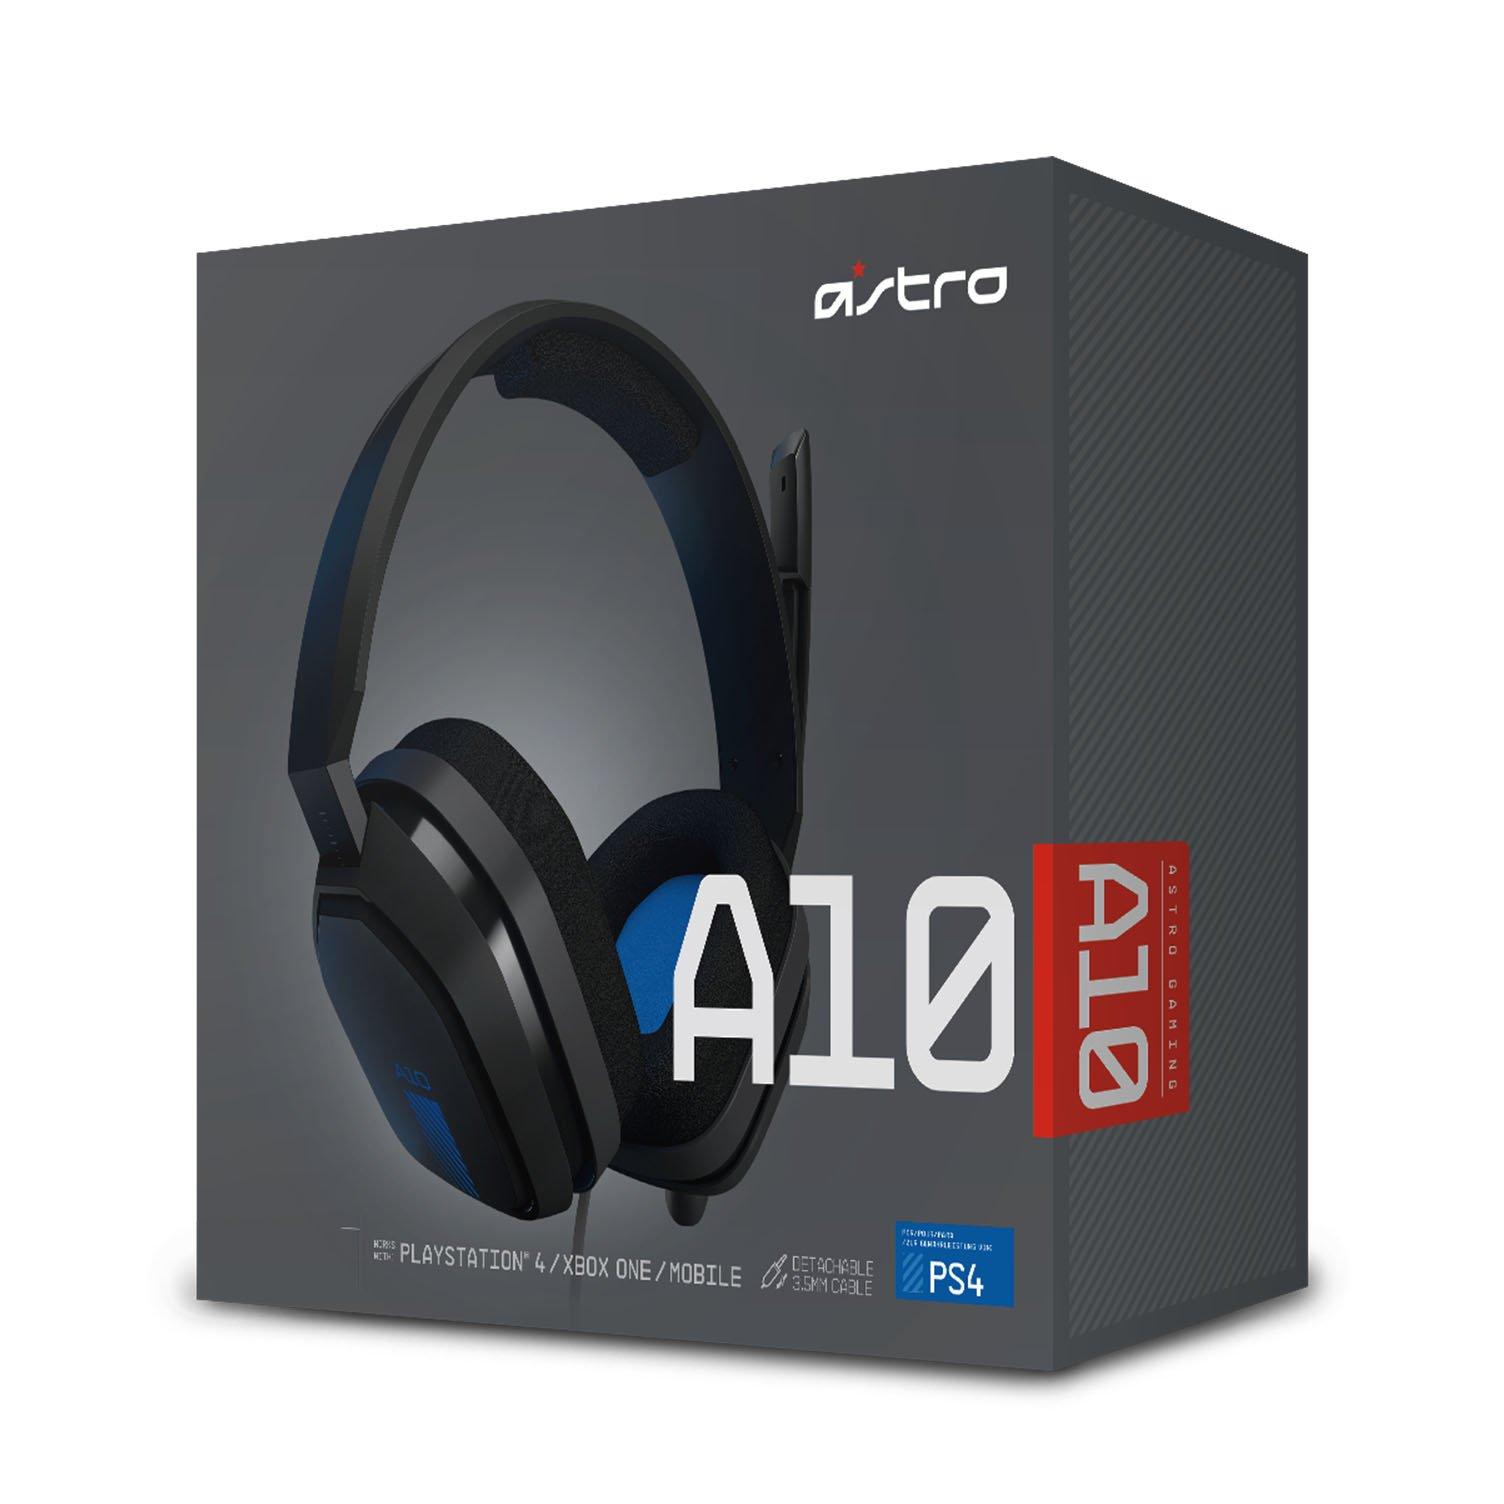 ps4 a10 headset